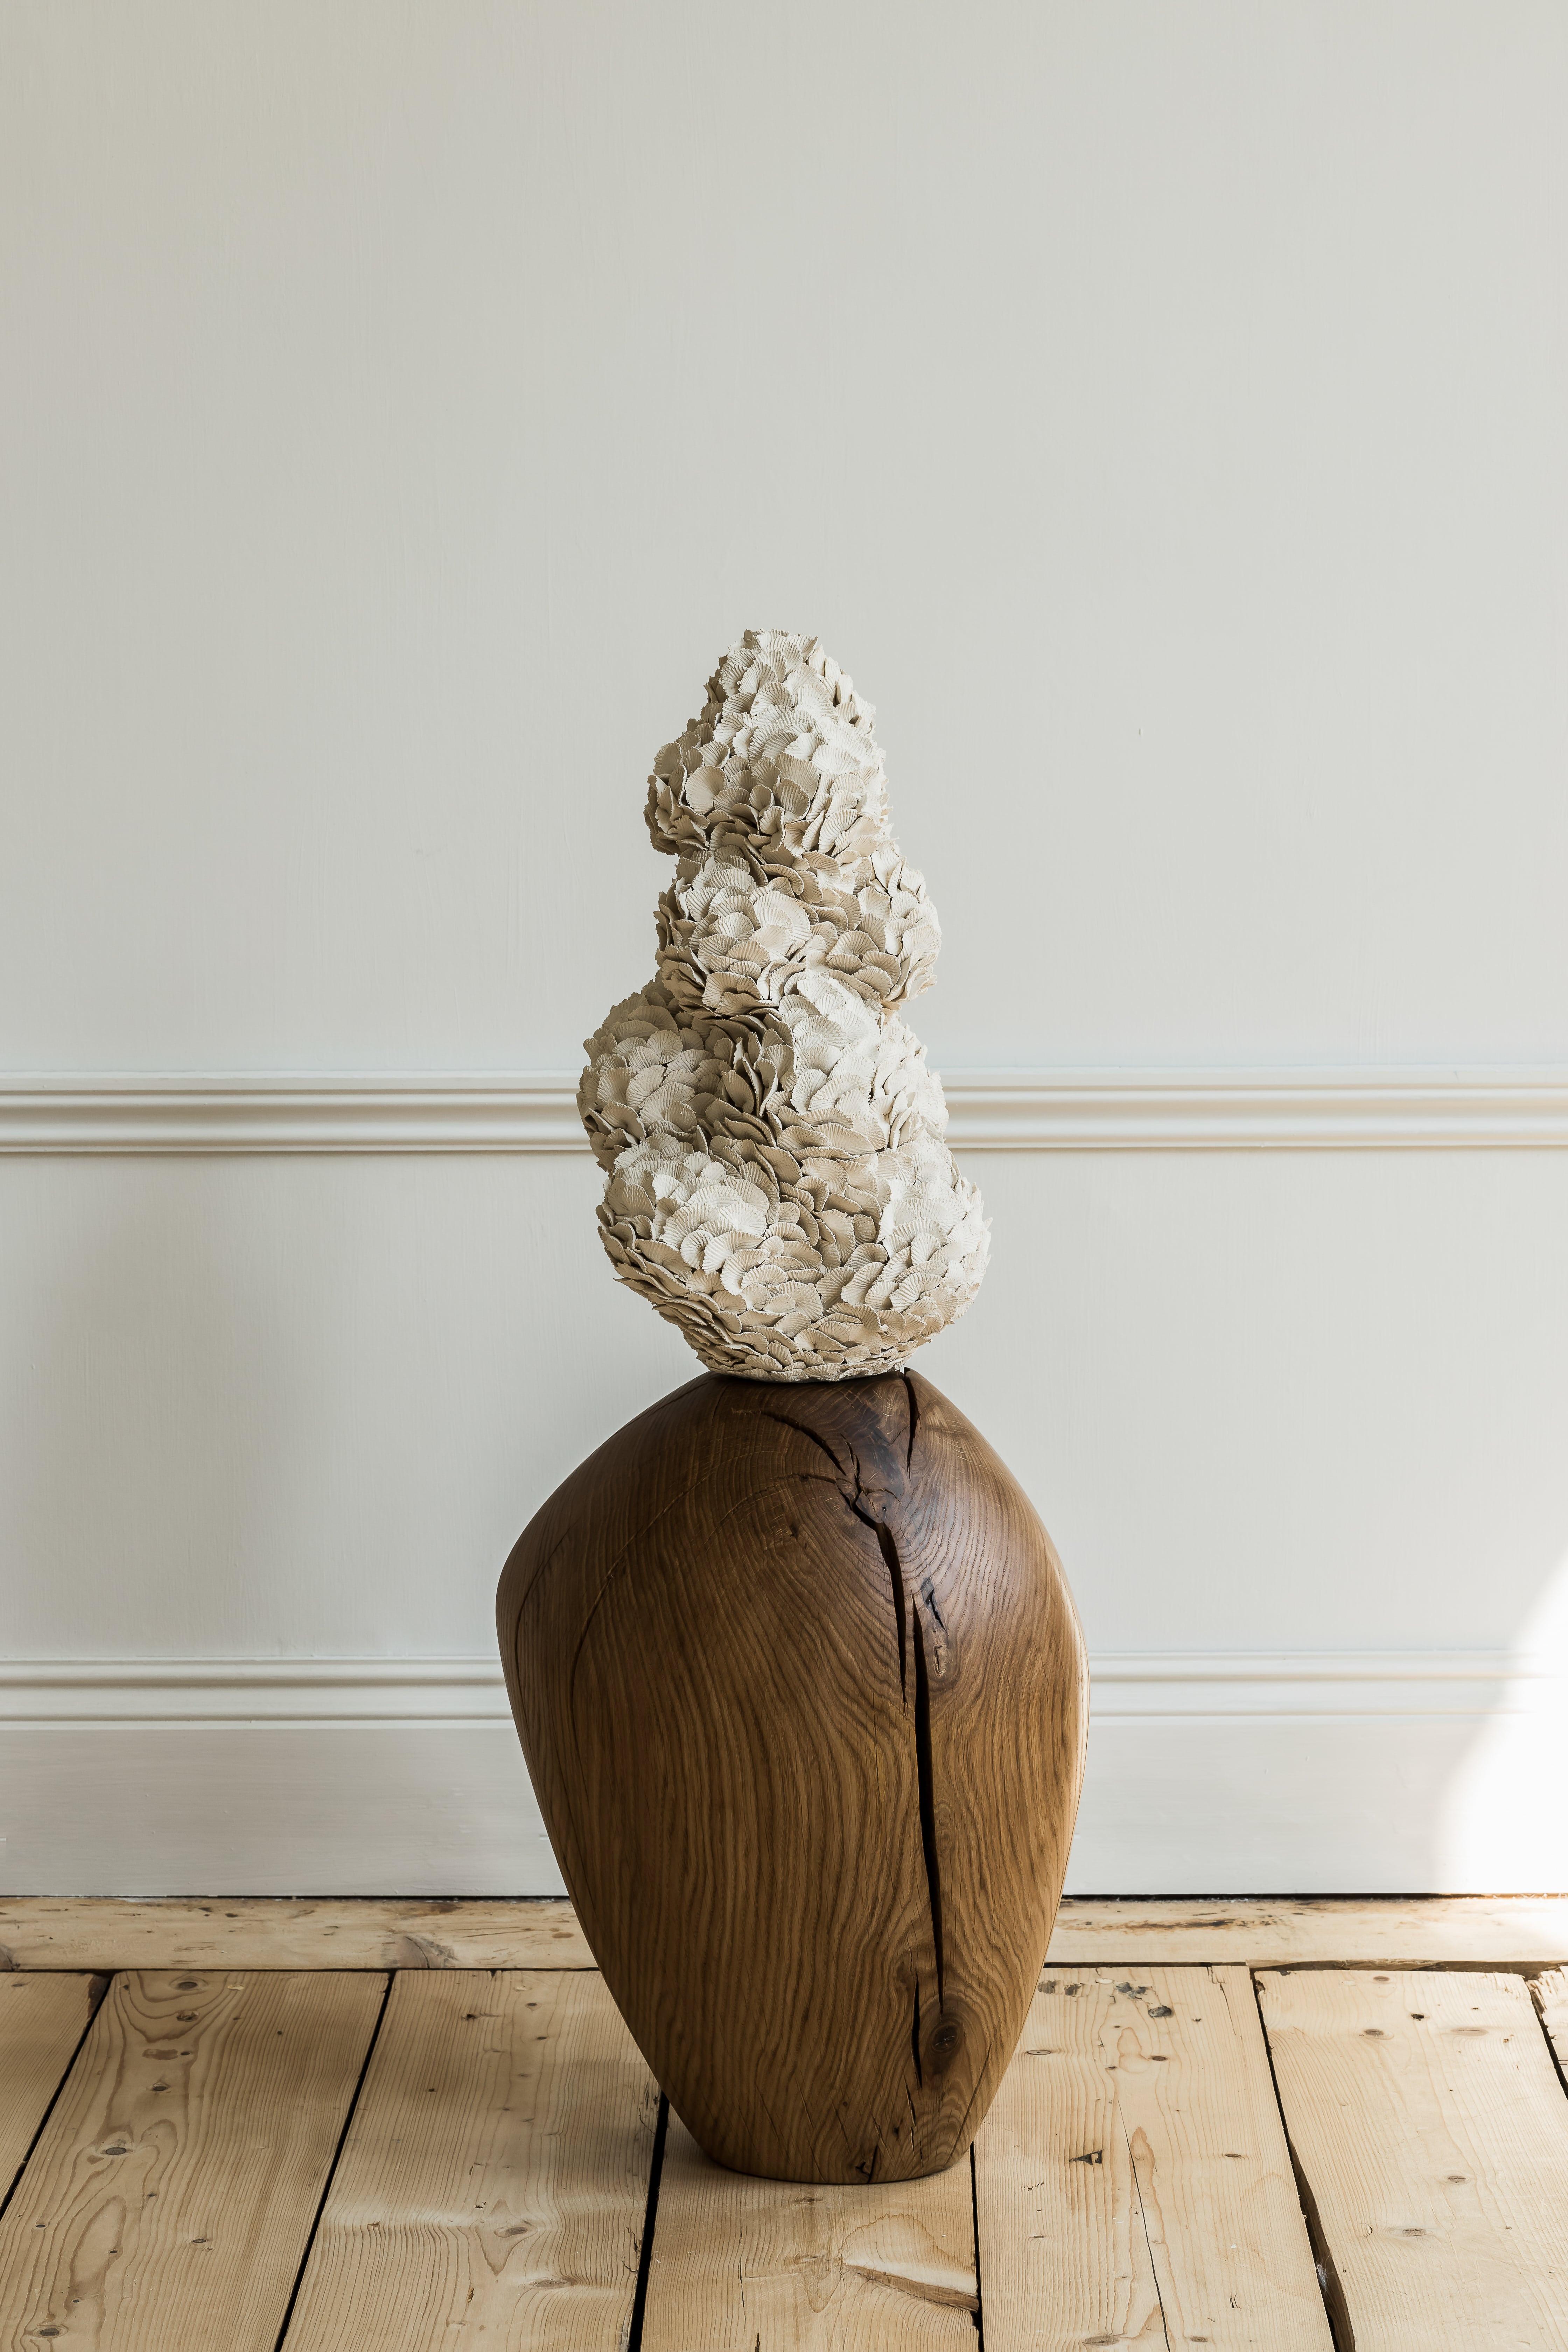 Fuga Papilio I sculpture by Hanna Heino
Dimensions: D 27 x W 34 x H 87 cm
Materials: Handbuilt, Stoneware Clay, Hand-Carved Solid Oak, Natural Wax, Wood.
Also available in different dimensions. 


Hanna Heino is a contemporary clay artist from